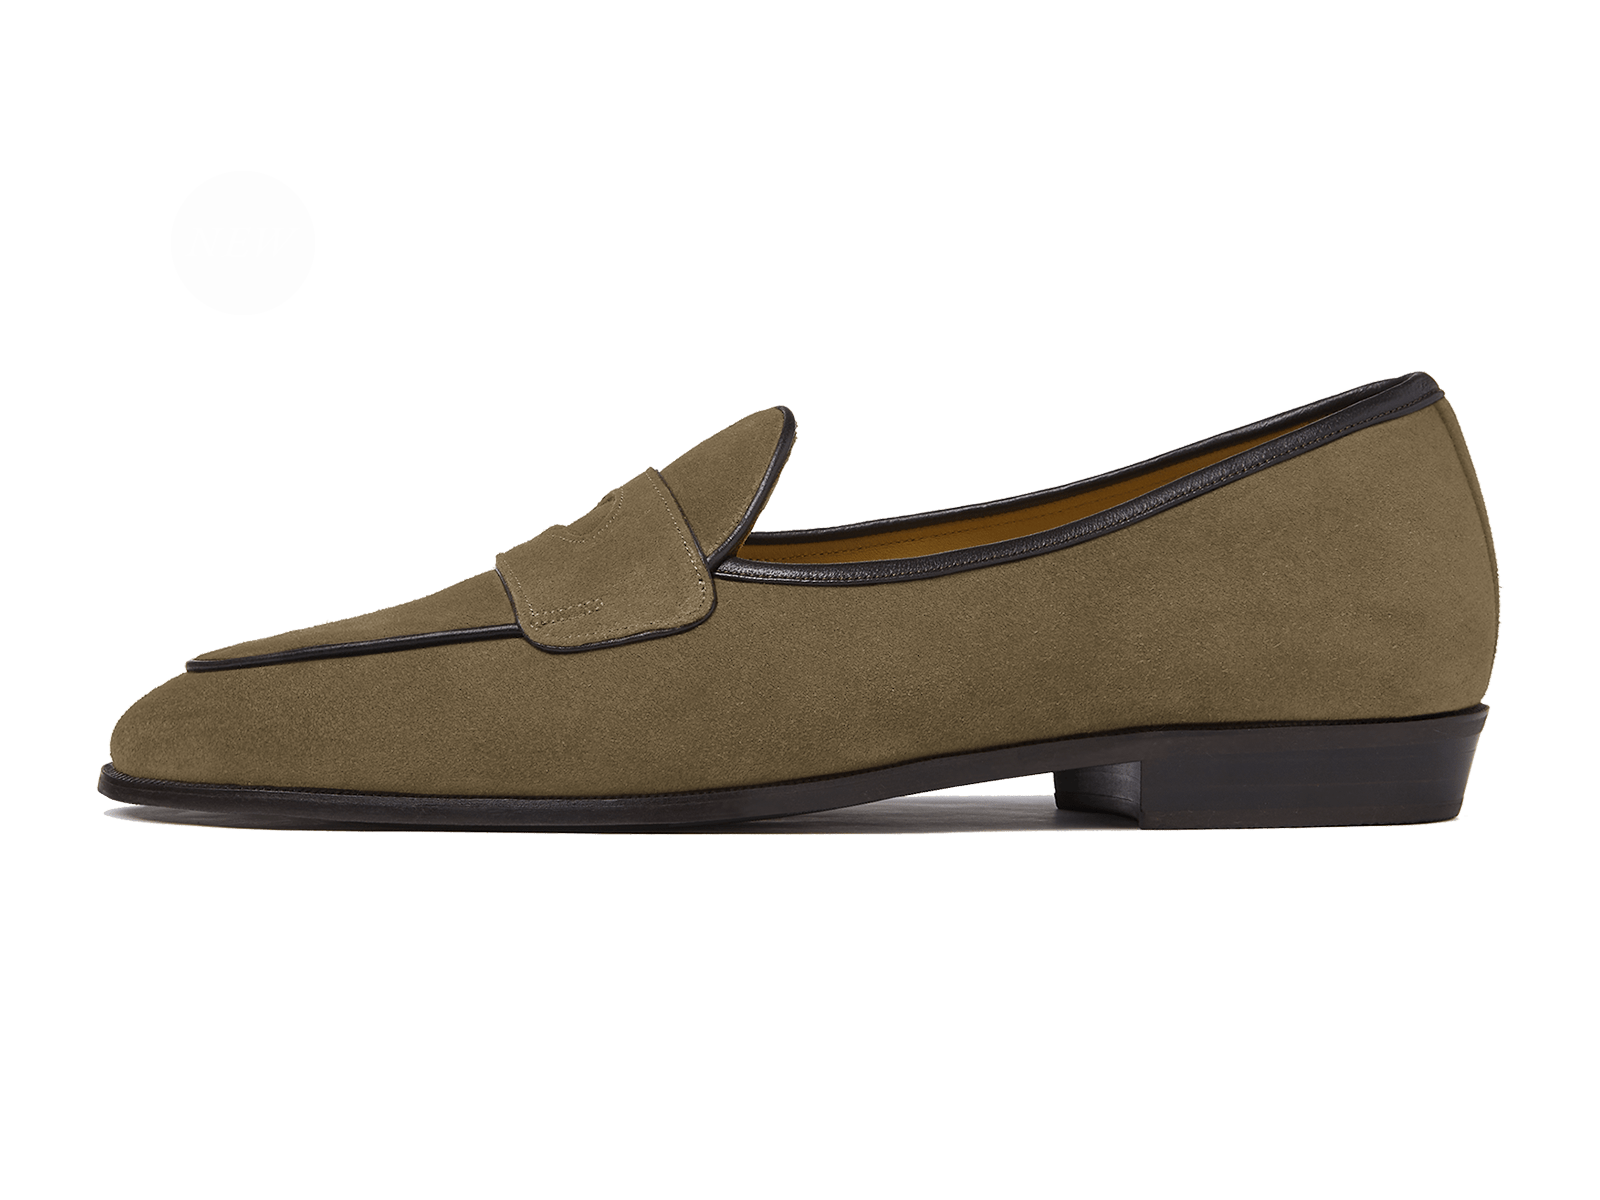 Sagan Ivy in Northern Green Glove Suede with Rubber Sole – Baudoin & Lange